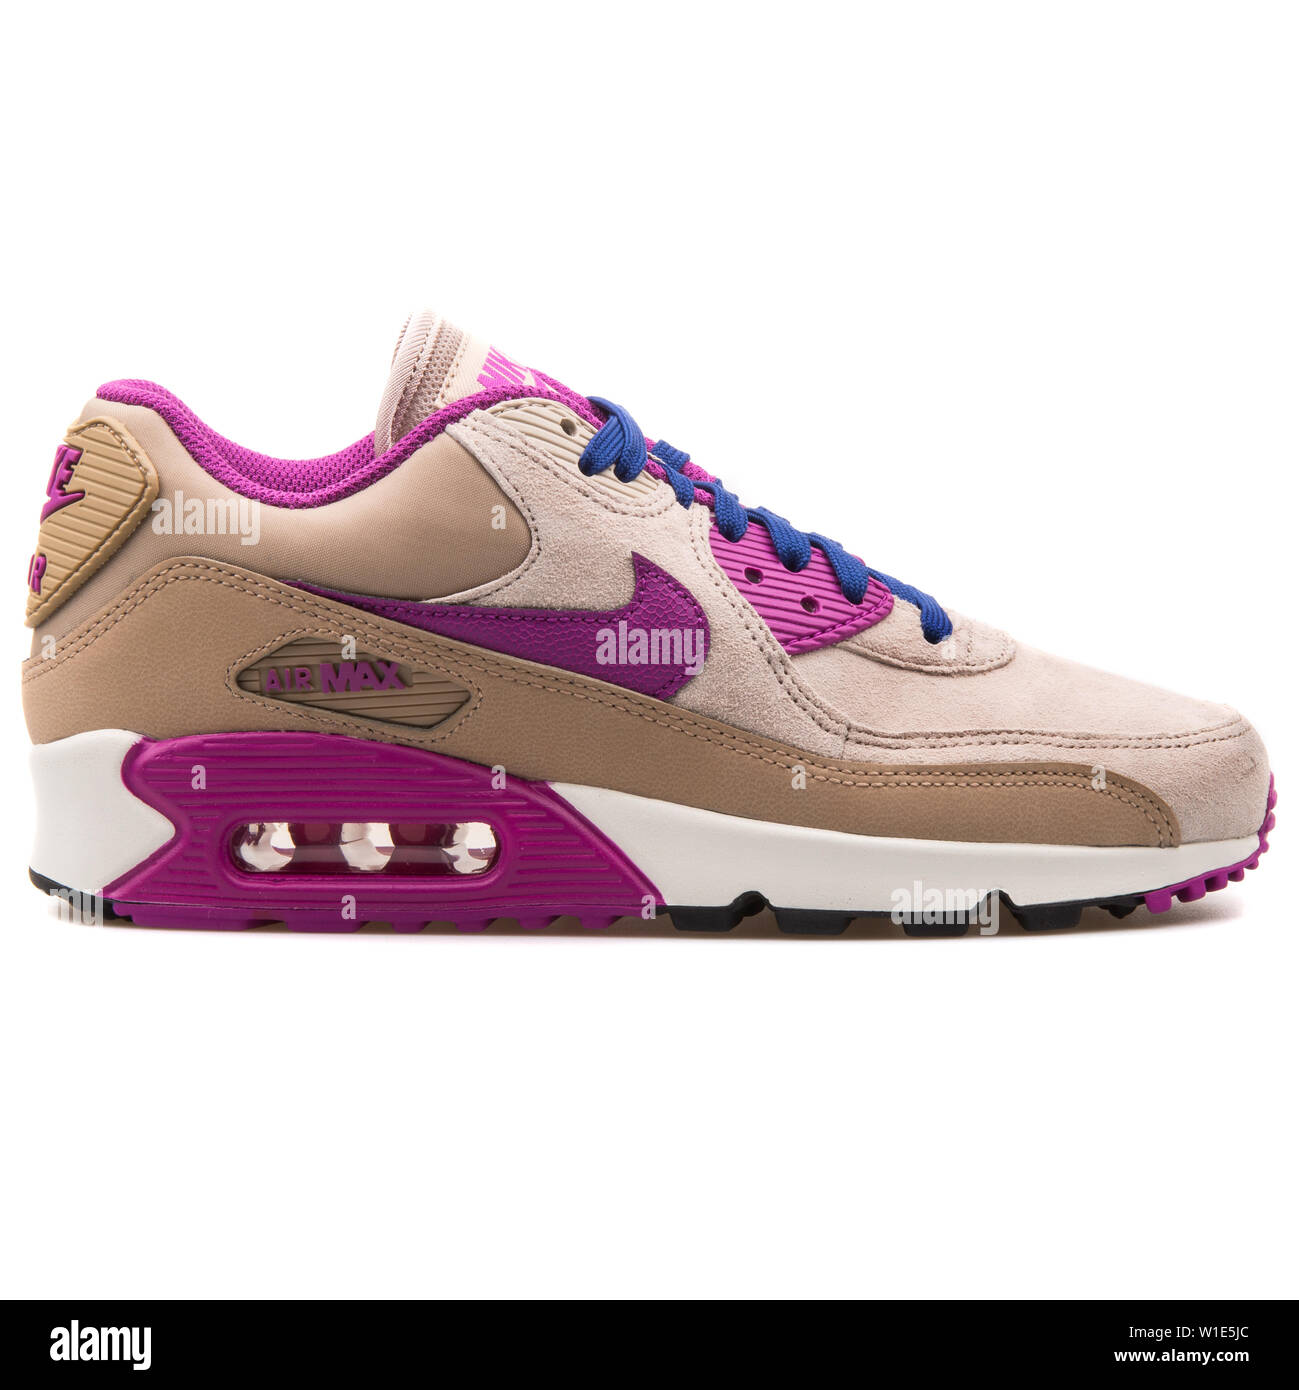 VIENNA, AUSTRIA - AUGUST 25, 2017: Nike Air Max 90 Leather beige and purple  sneaker on white background Stock Photo - Alamy